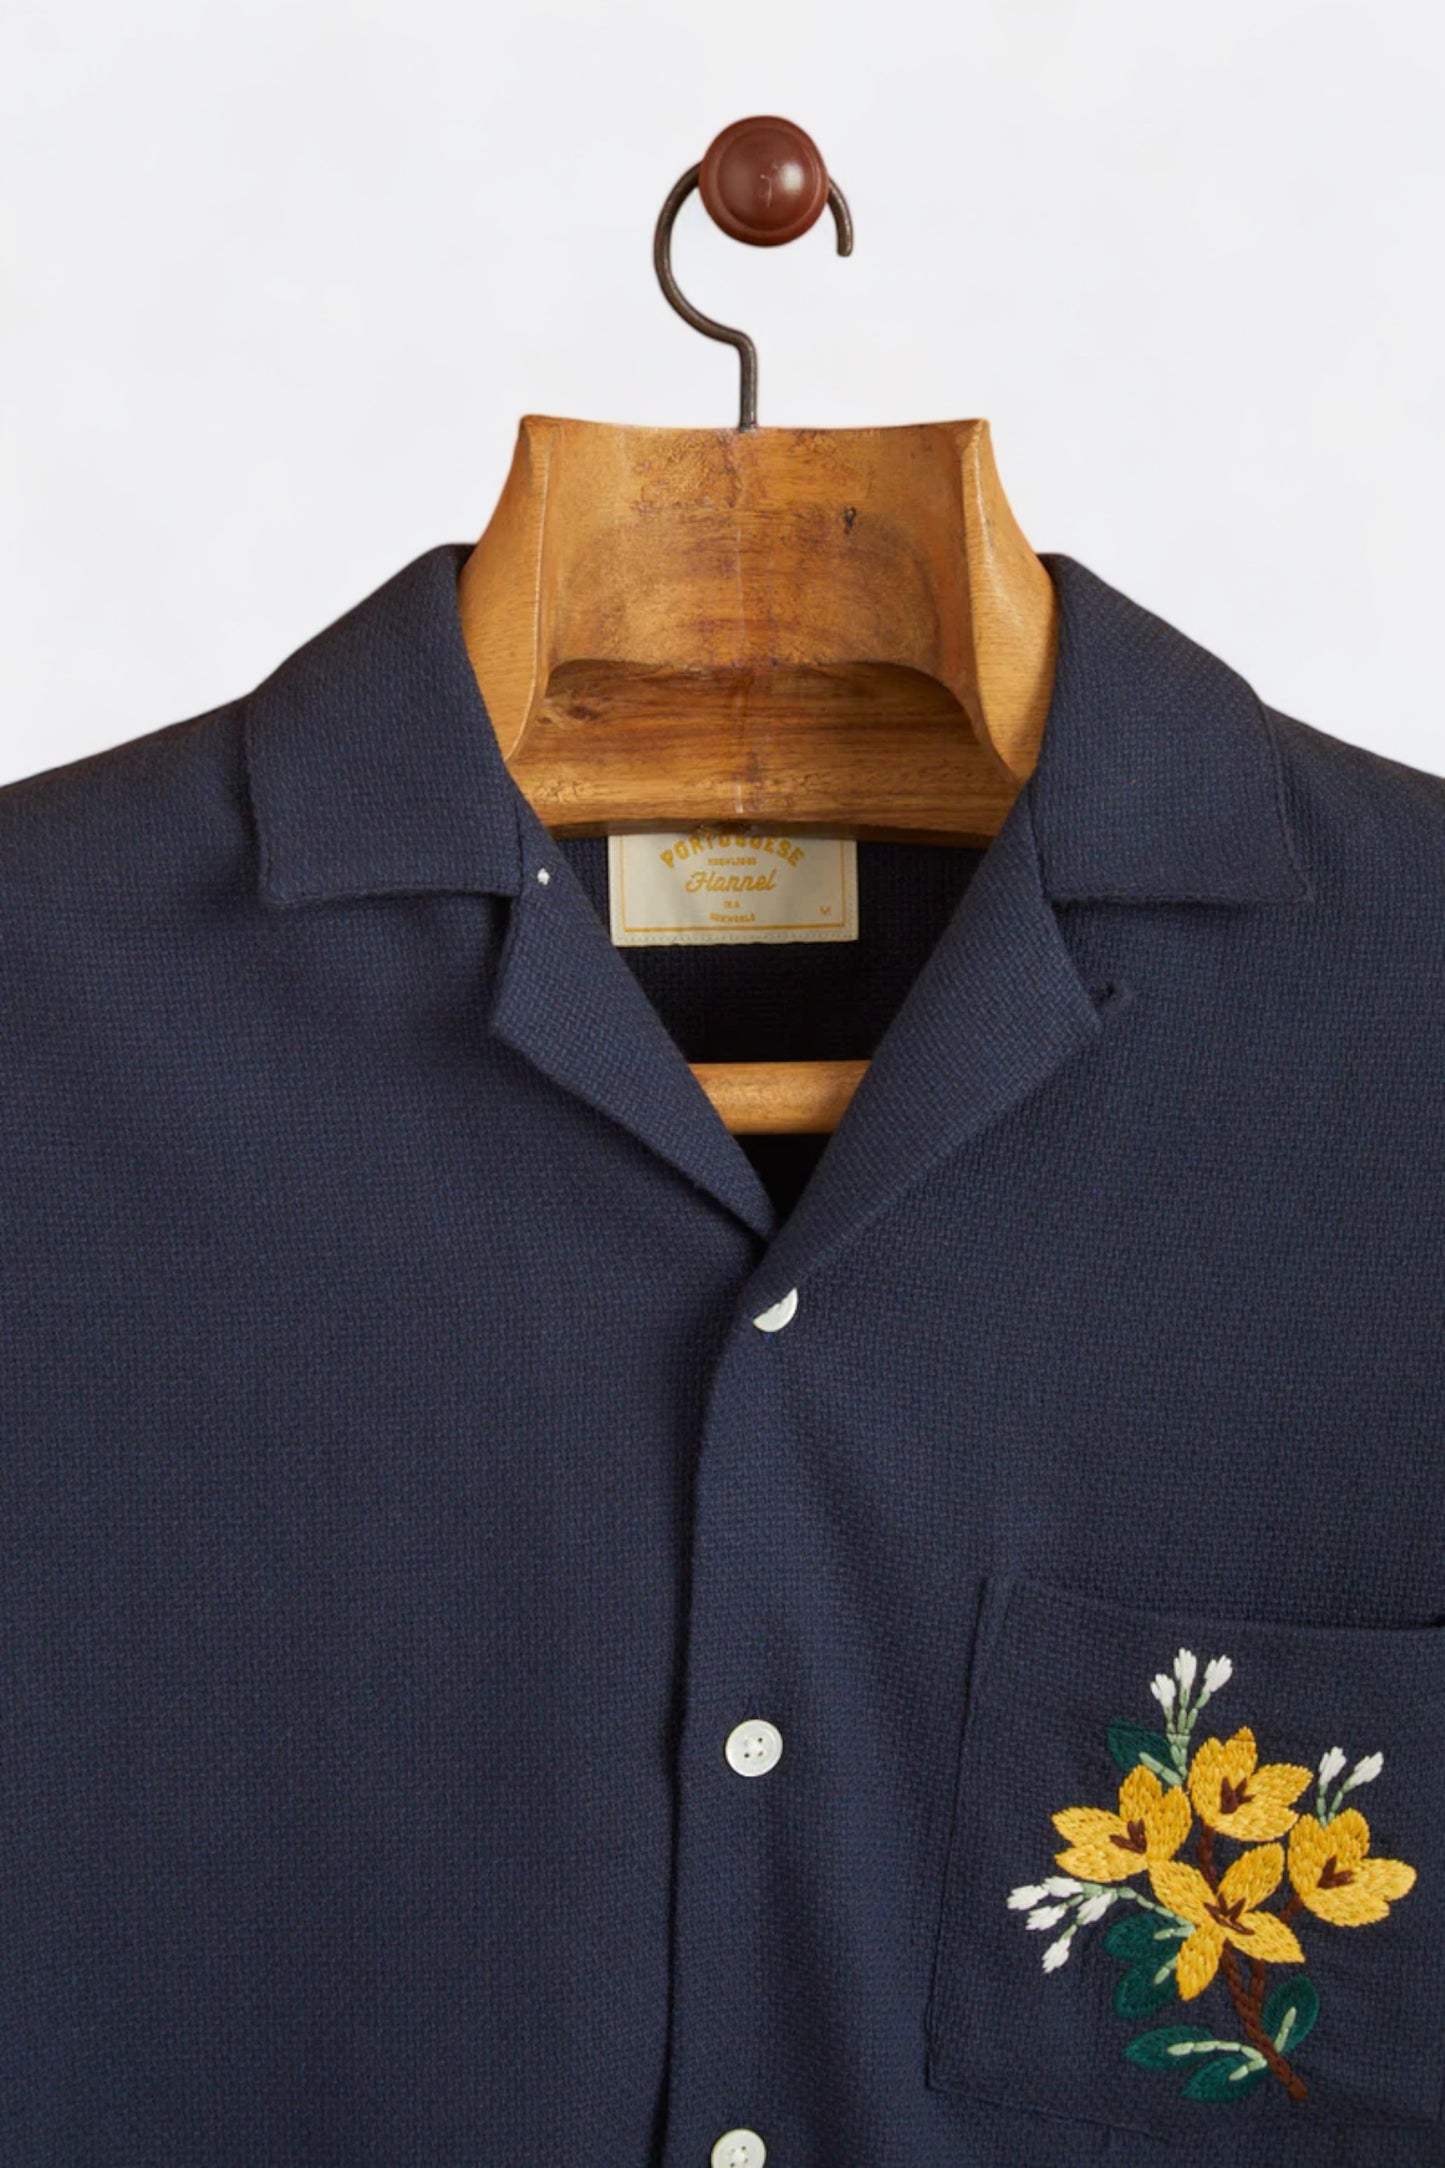 Portuguese Flannel - Pique Embroidery Flowers Shirt (Navy)